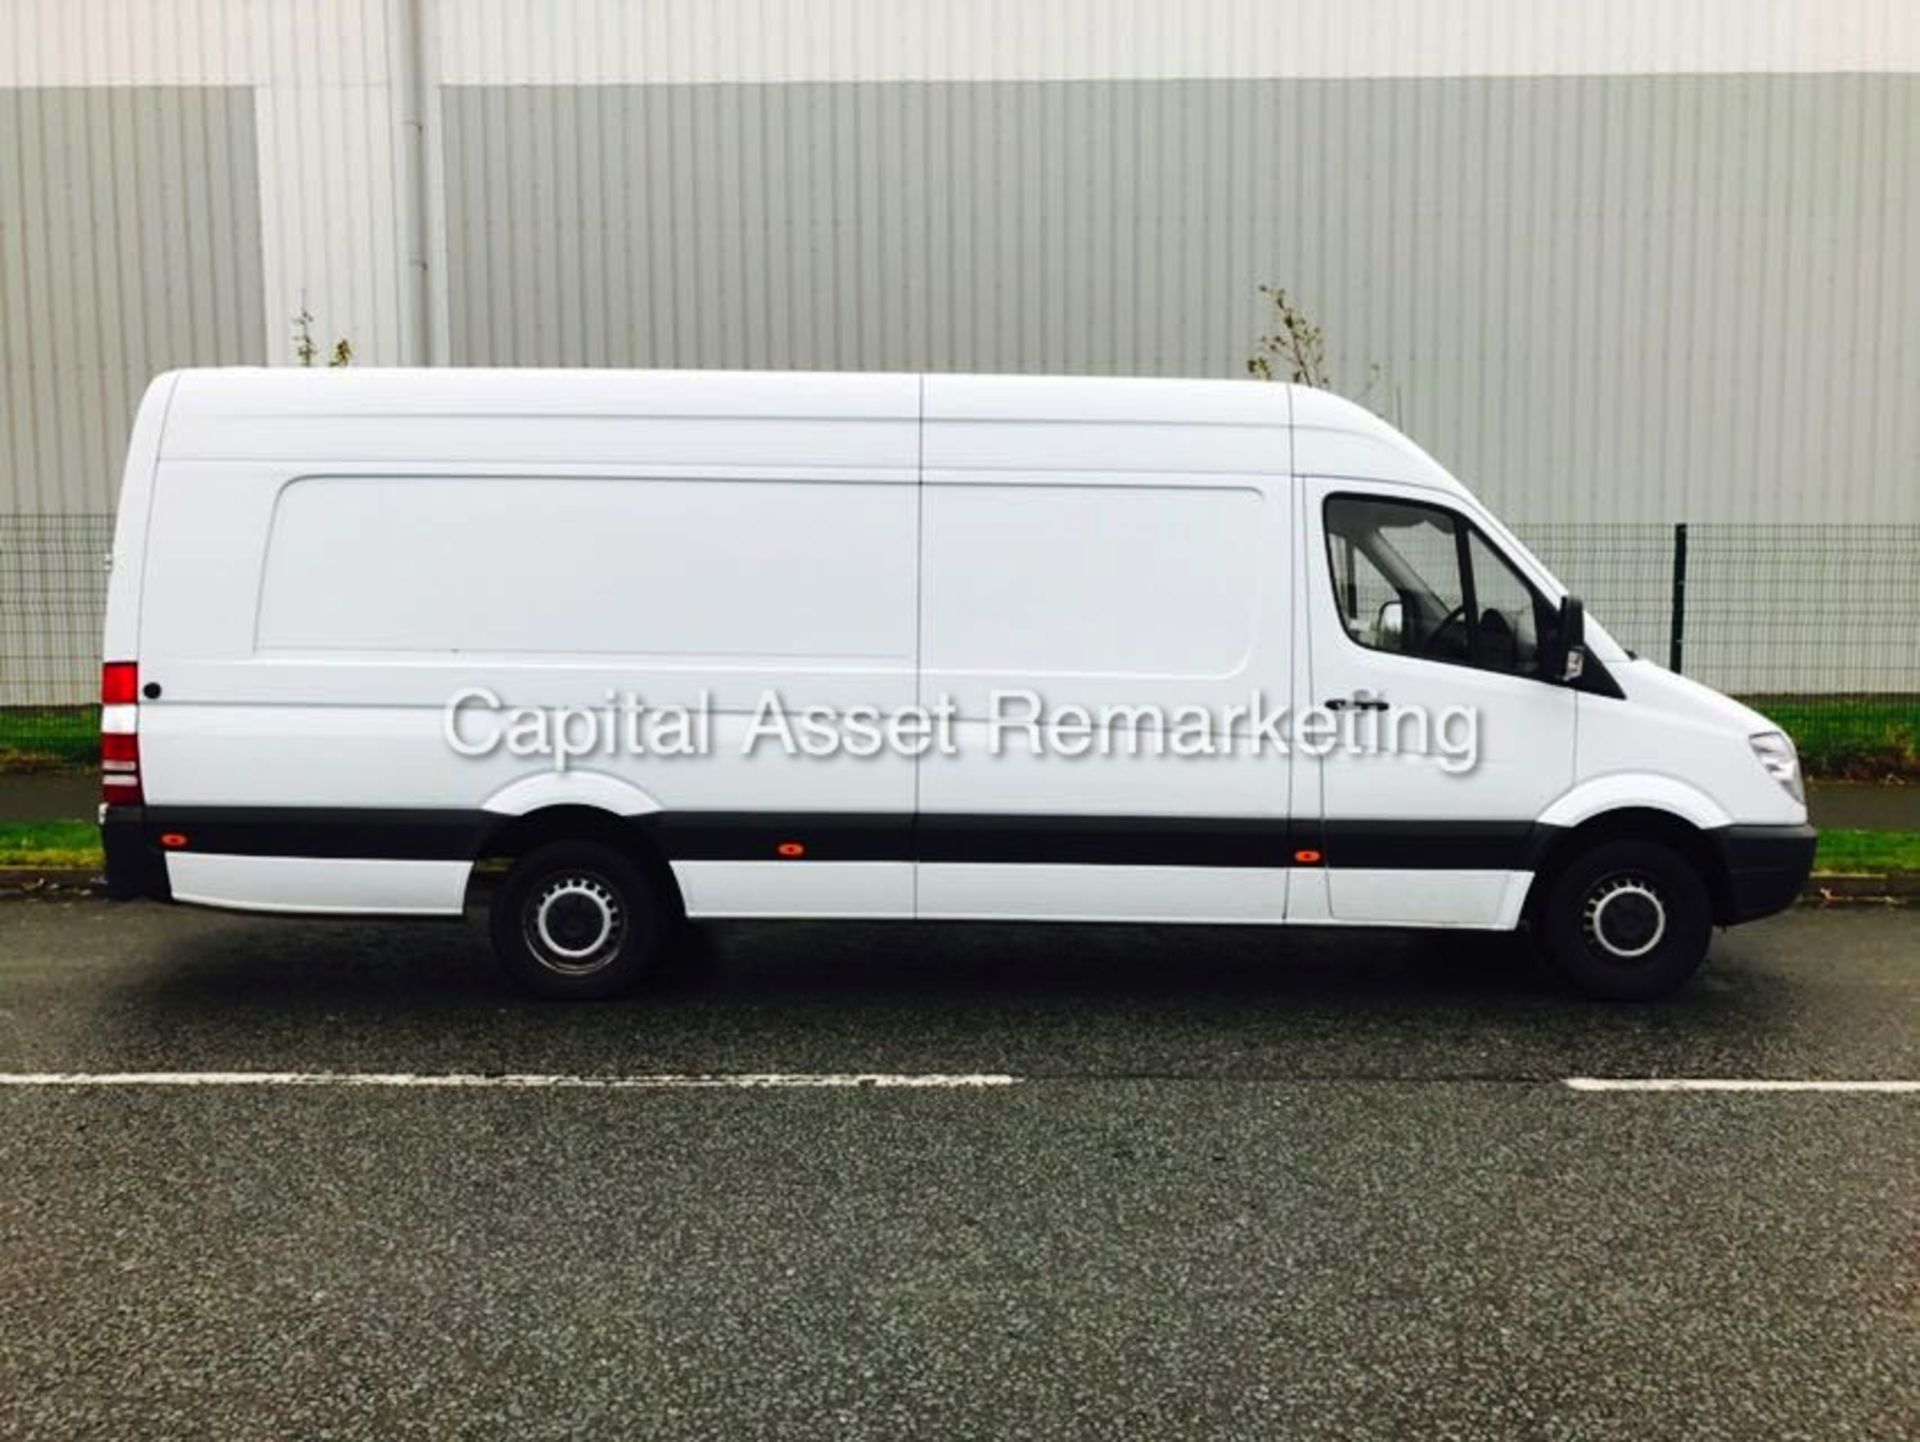 (On Sale) MERCEDES SPRINTER 313CDI - EXTRA LONG WHEEL BASE 4.7 MTR - 2014 MODEL - 1 OWNER -LOW MILES - Image 5 of 15